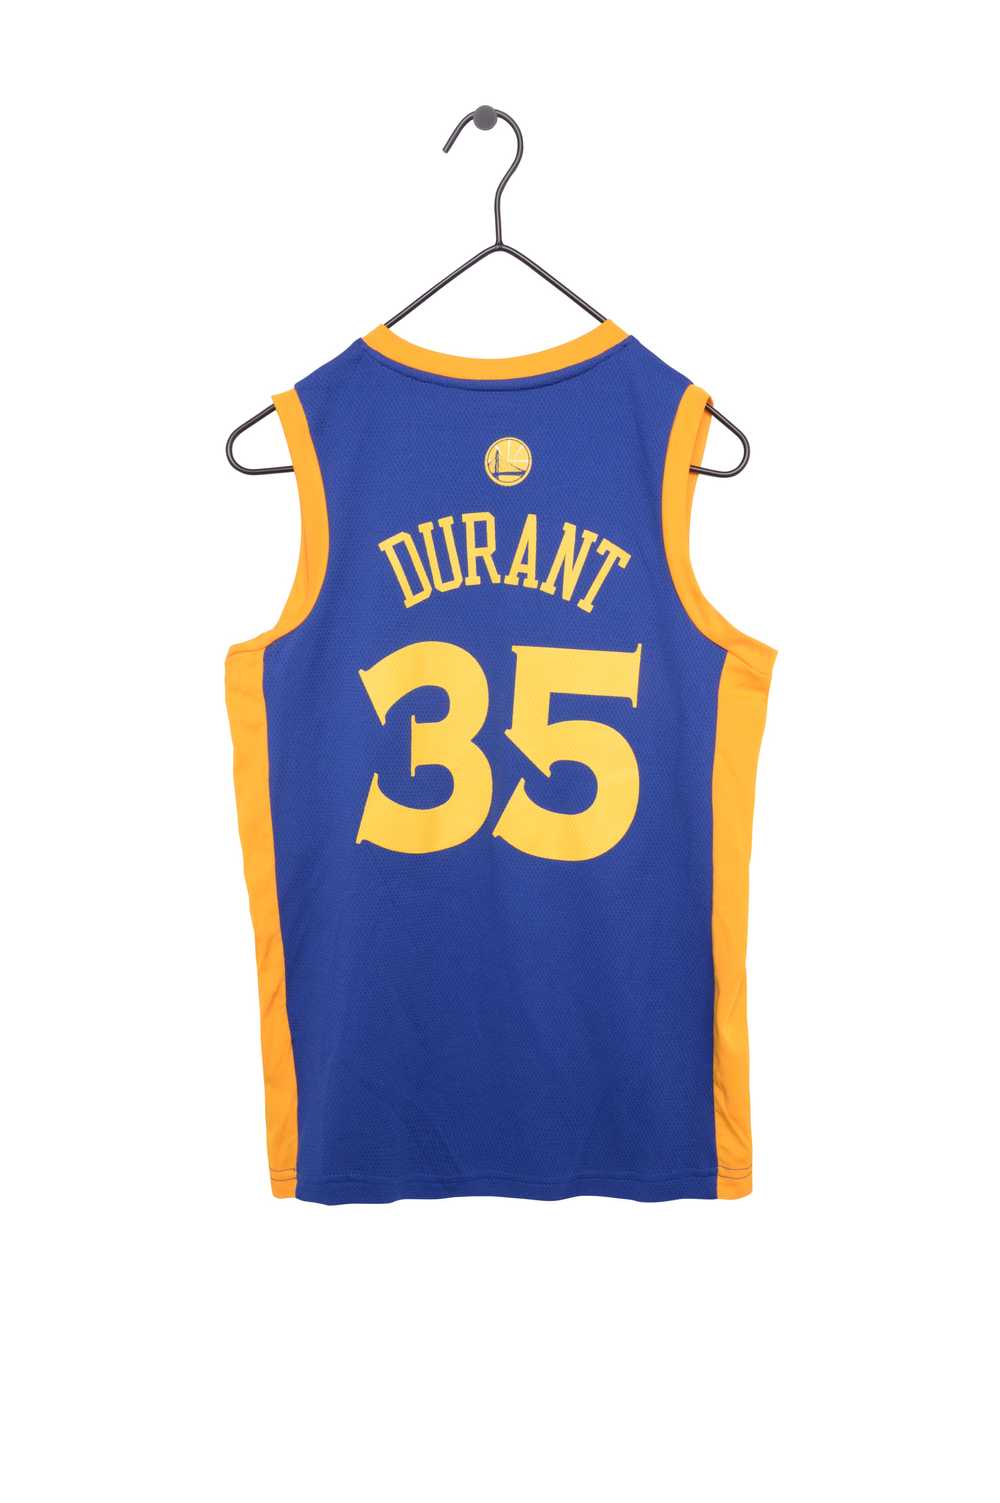 Golden State Warriors Jersey - image 2